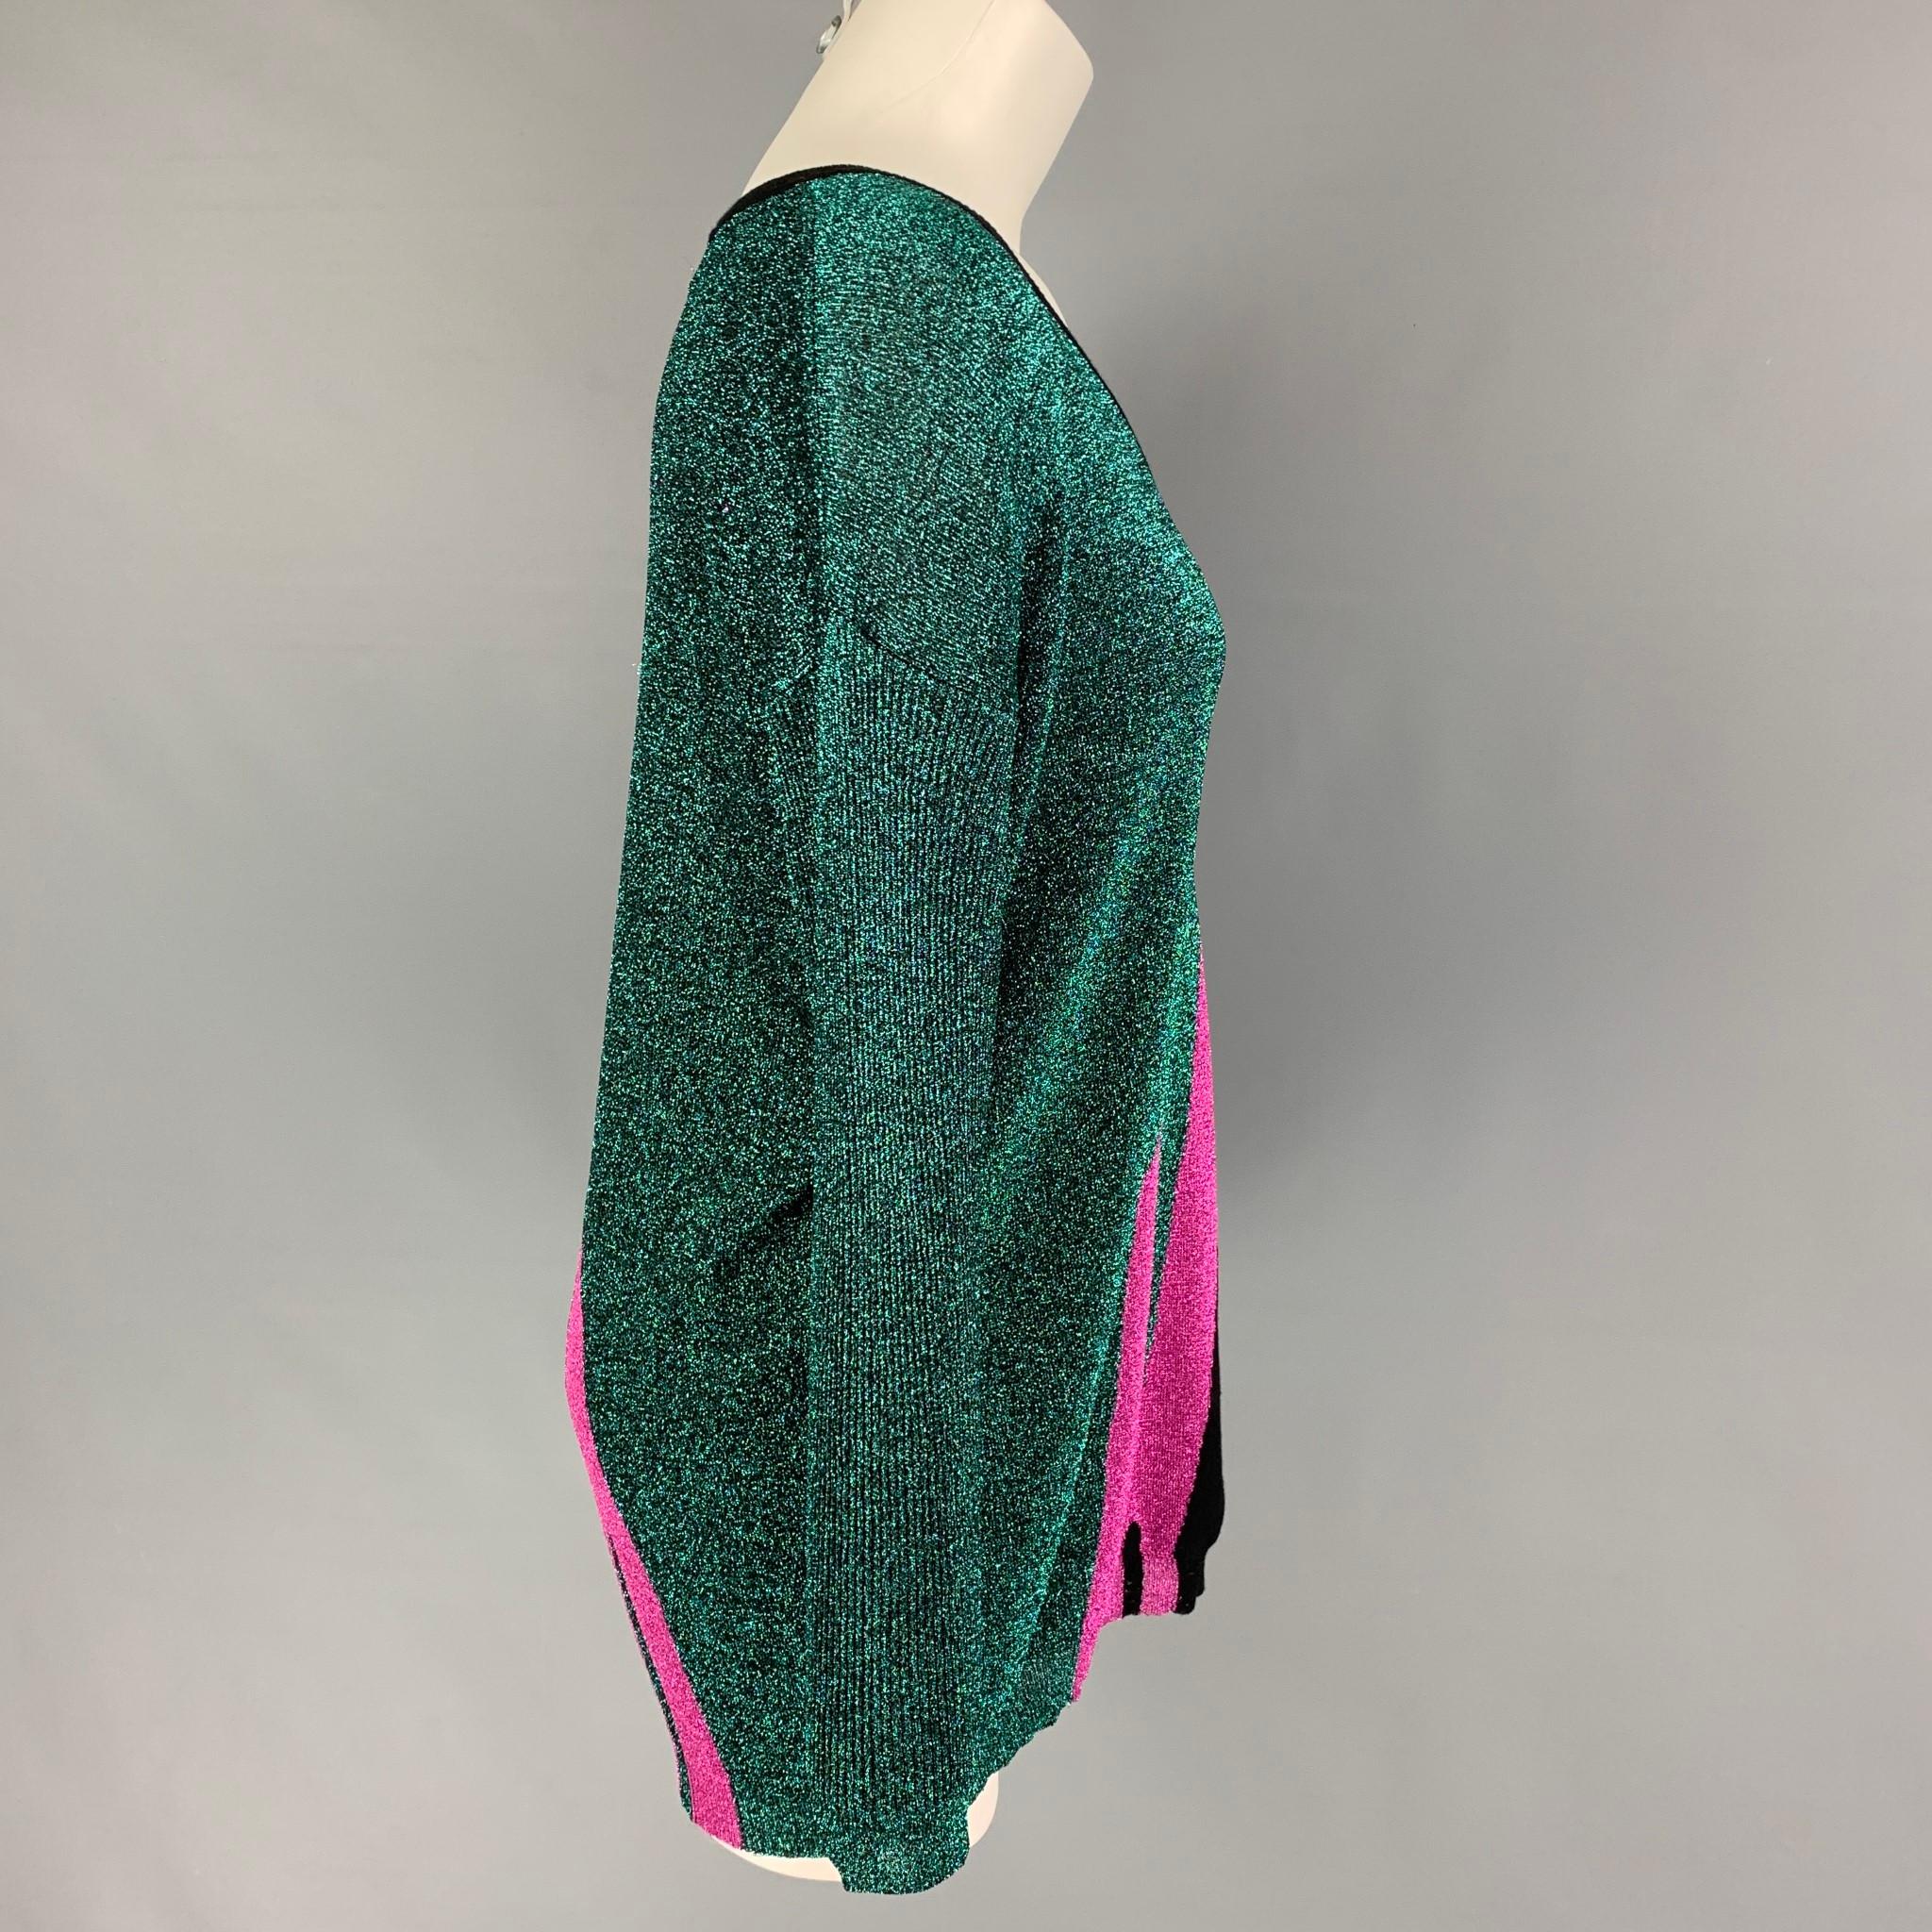 DSQUARED2 pullover comes in a black & green wool blend with a pink metallic detail featuring a loose fit and v-neck. Made in Italy. 

New With Tags. 
Marked: XS

Measurements:

Shoulder: 23 in.
Bust: 44 in.
Sleeve: 21 in.
Length: 28 in. 